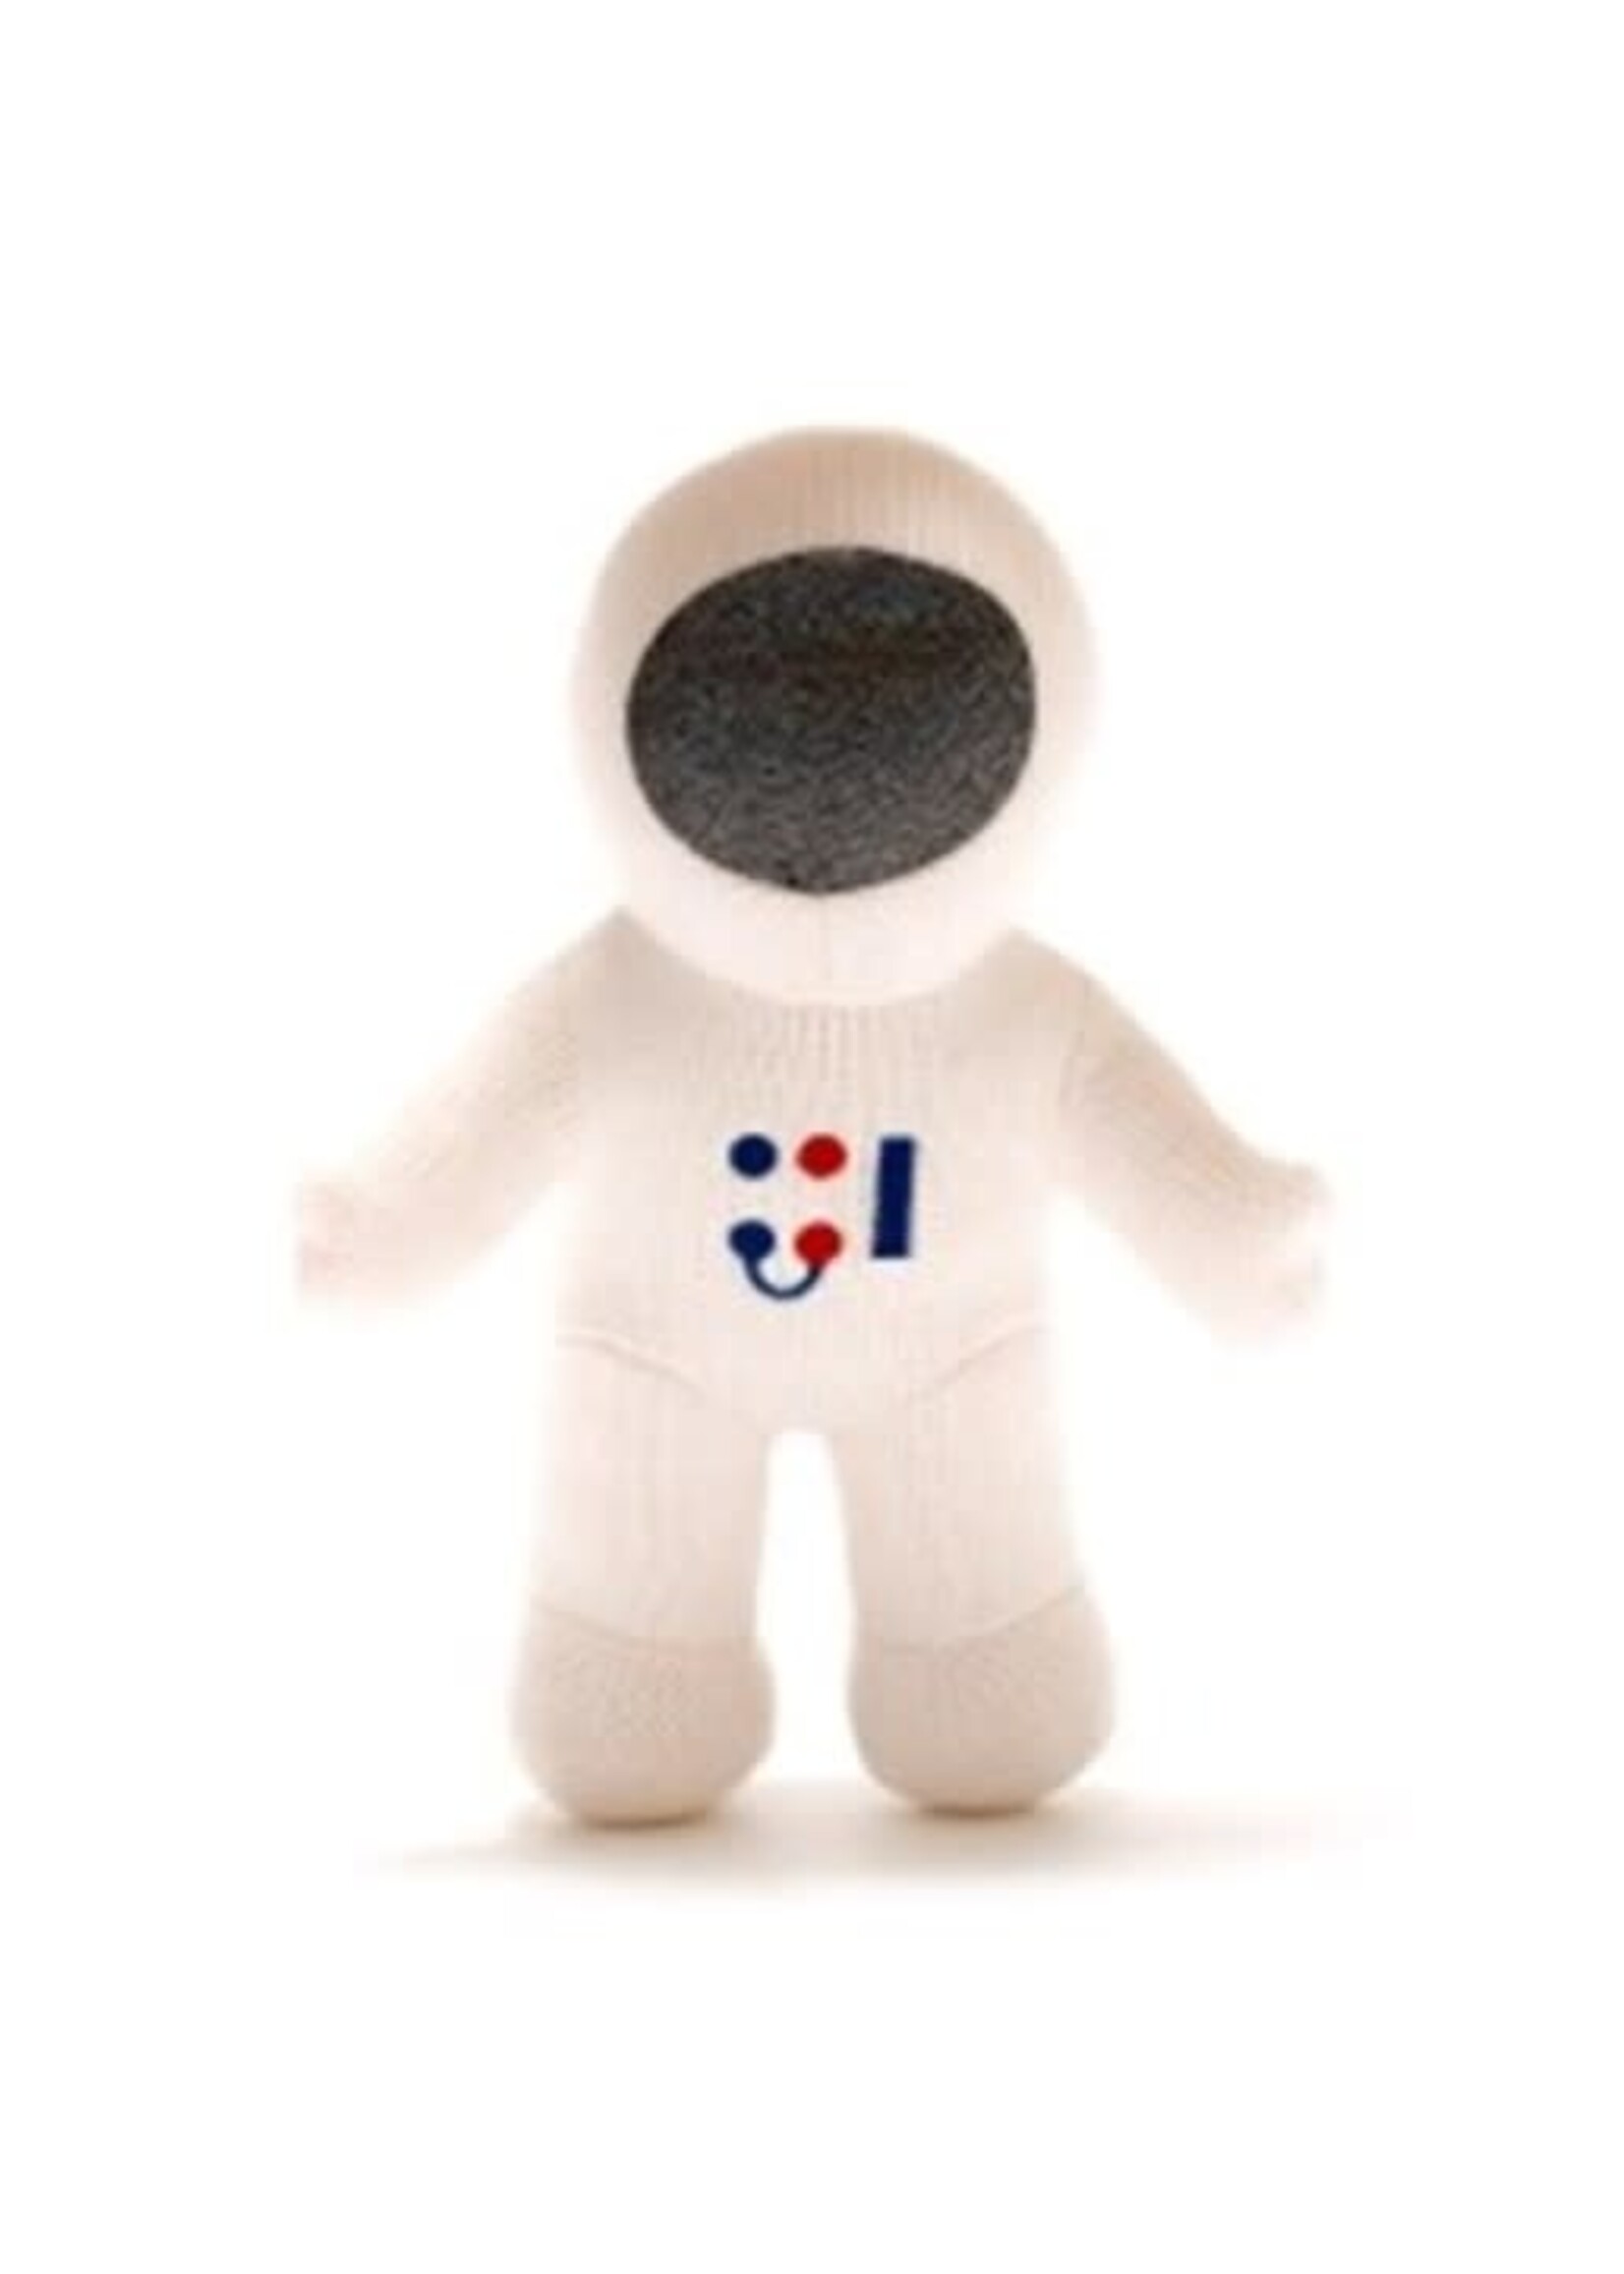 Knitted Astronaut Plush Toy